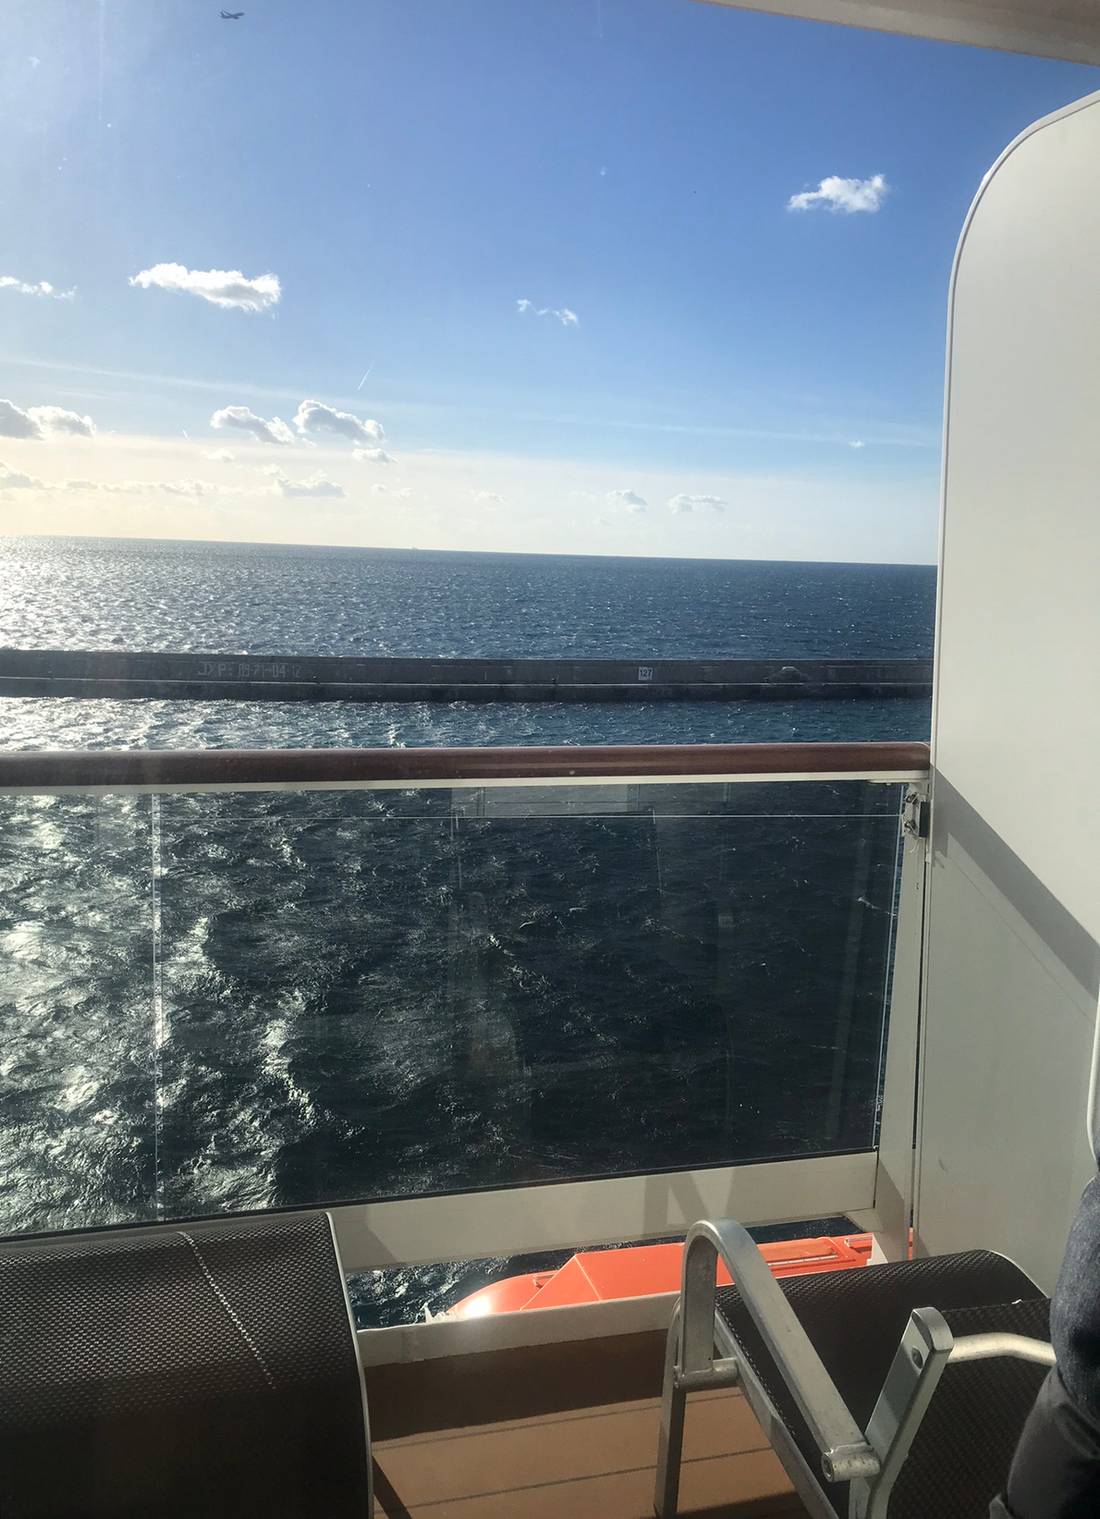 # source : my personal cruise balcony on the last ship